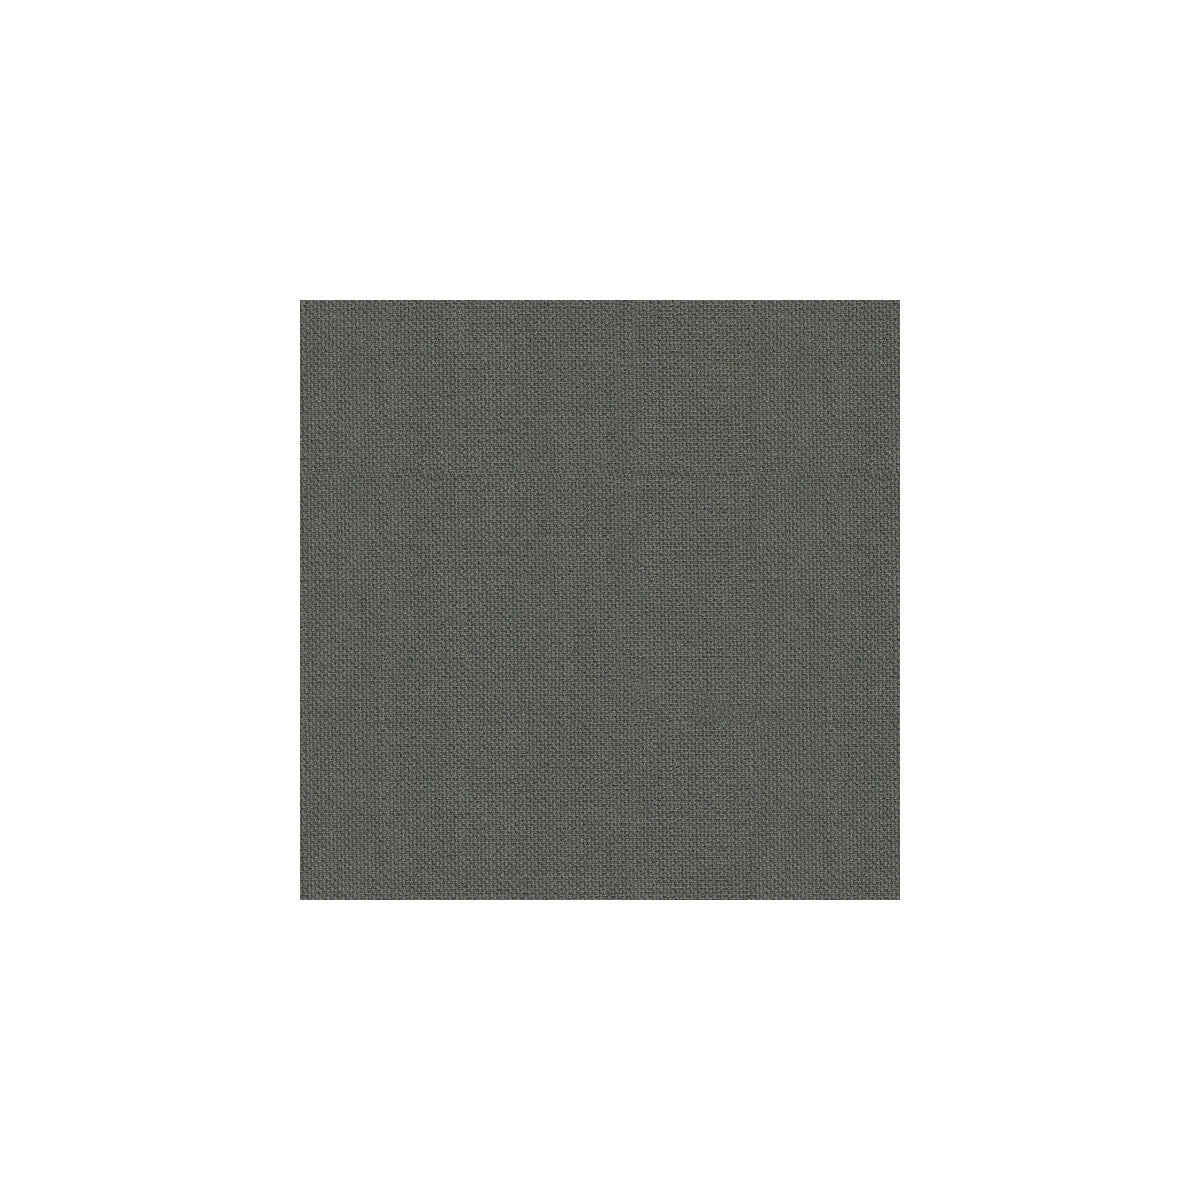 Hudson Solid fabric in silver color - pattern 32304.511.0 - by Kravet Contract